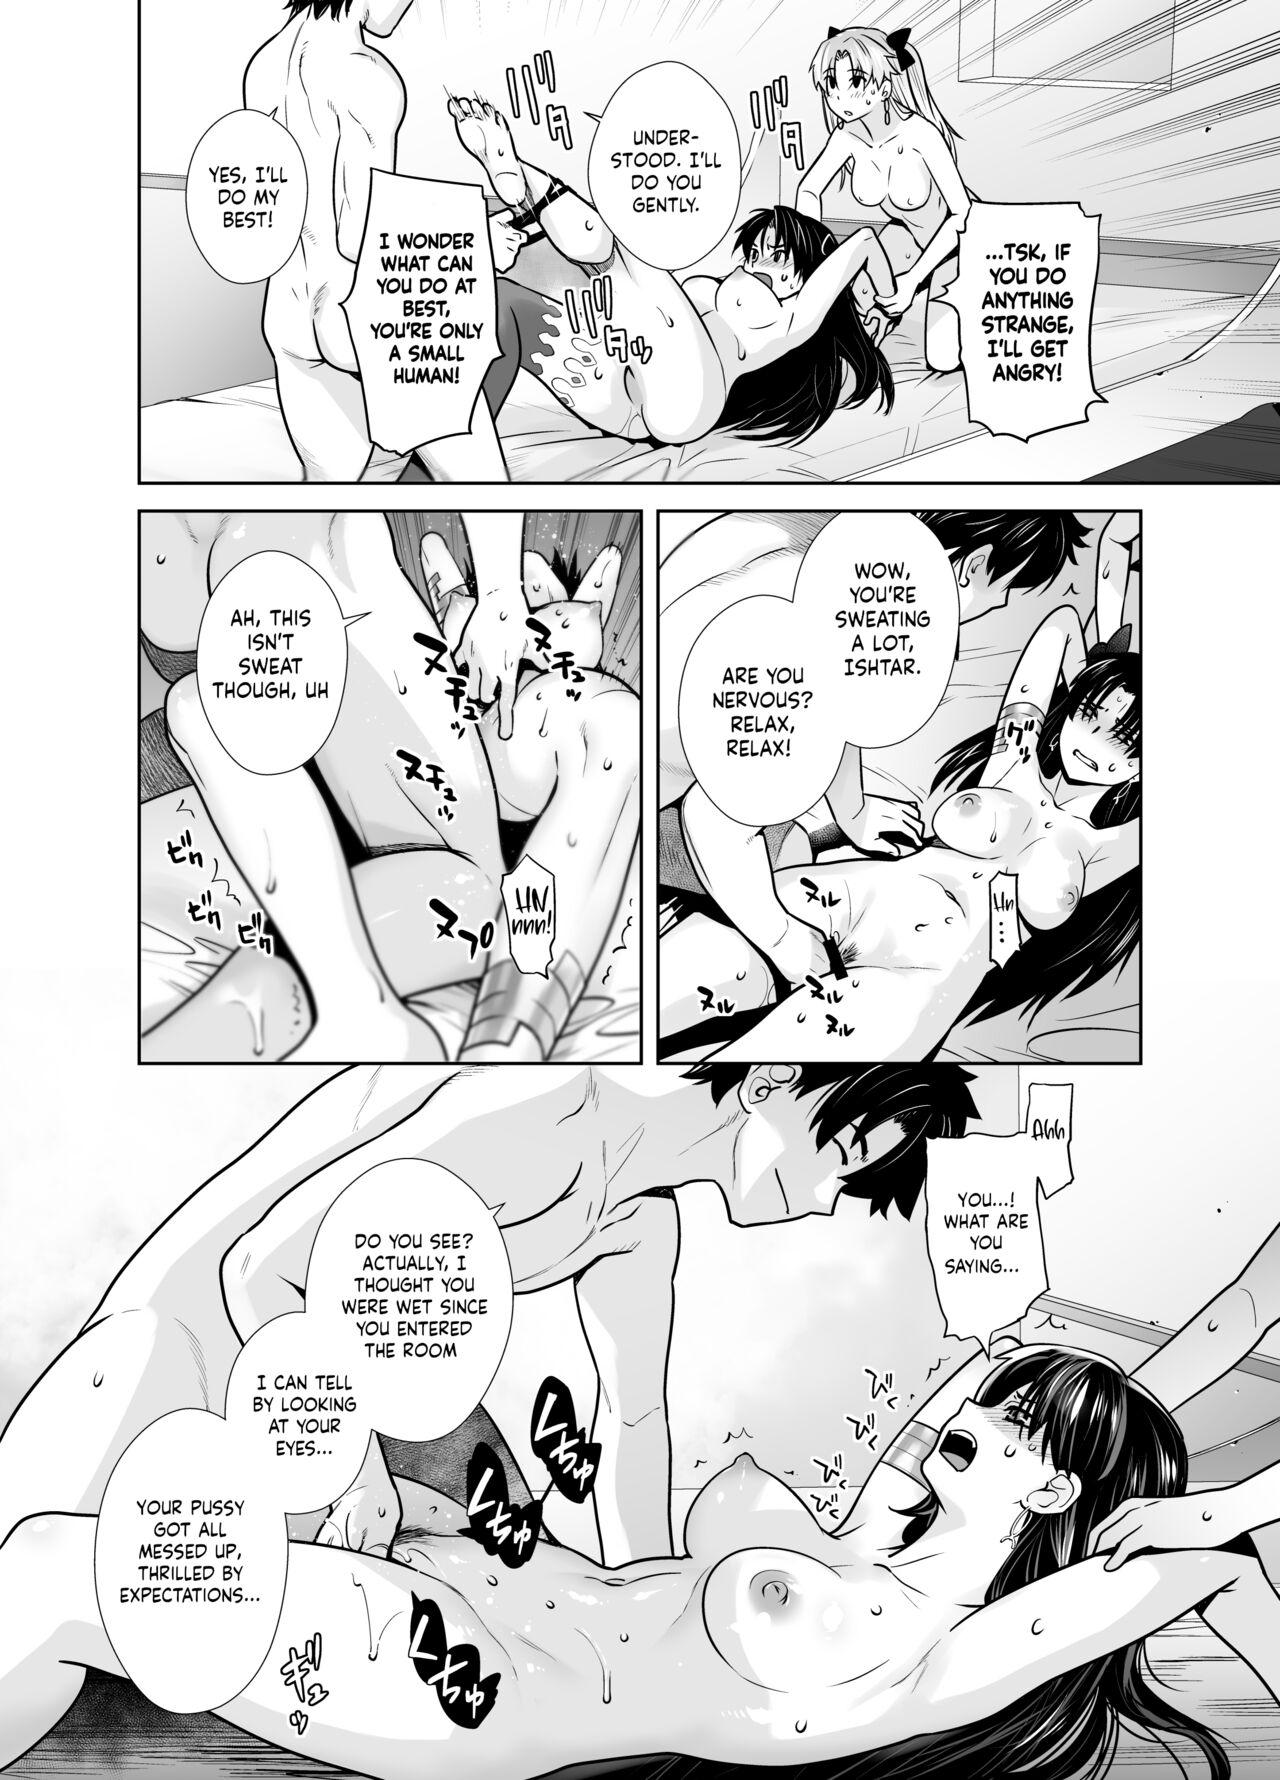 Muscular HEAVEN'S DRIVE 10 - Fate grand order France - Page 12